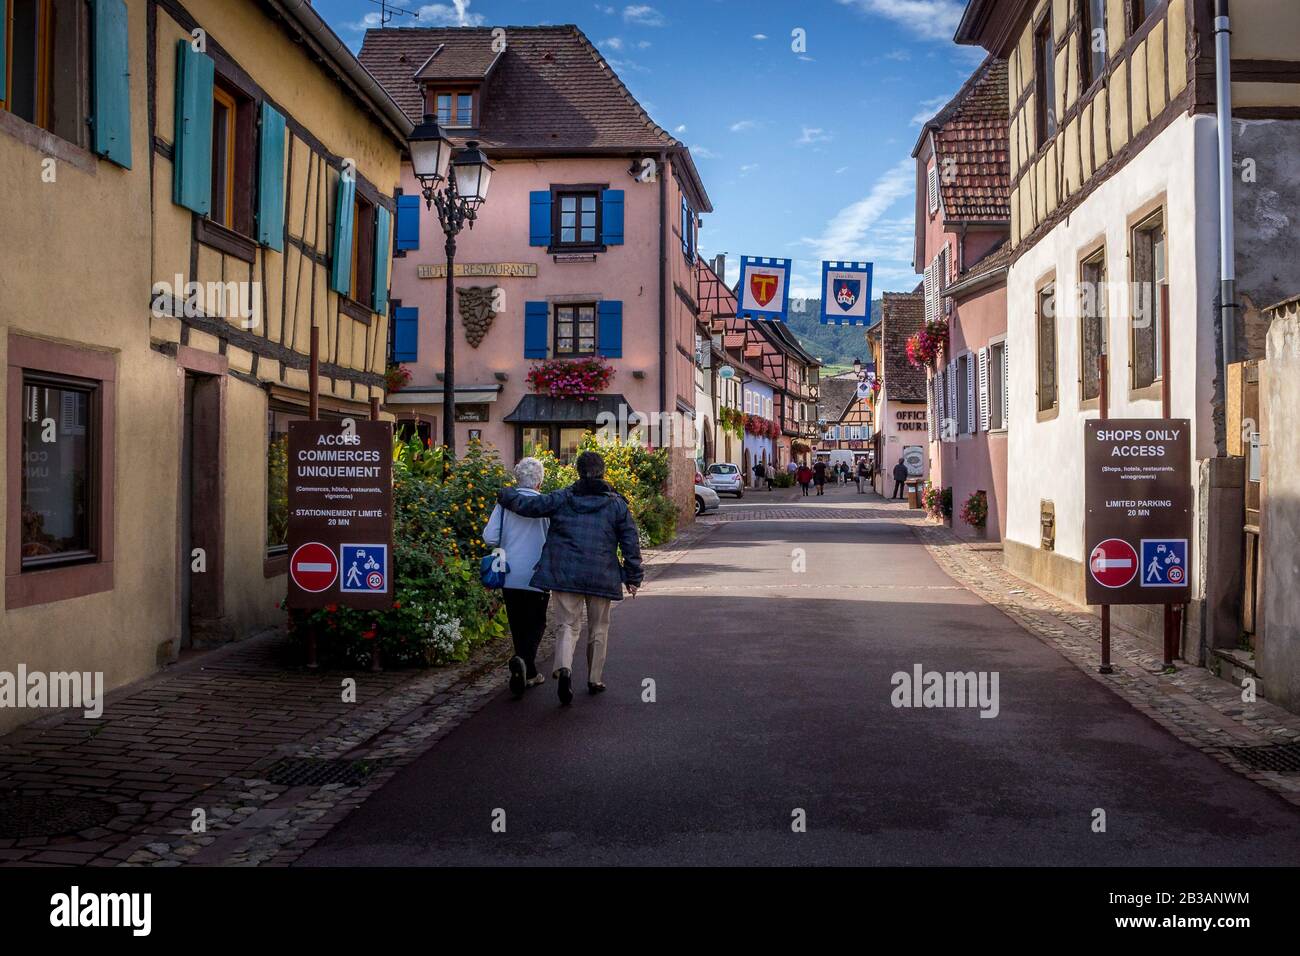 Eguisheim / Alsace, France - 16 sep. 2015: Beautiful view of charming street scene with colorful houses in the historic town of Eguisheim on an idylli Stock Photo